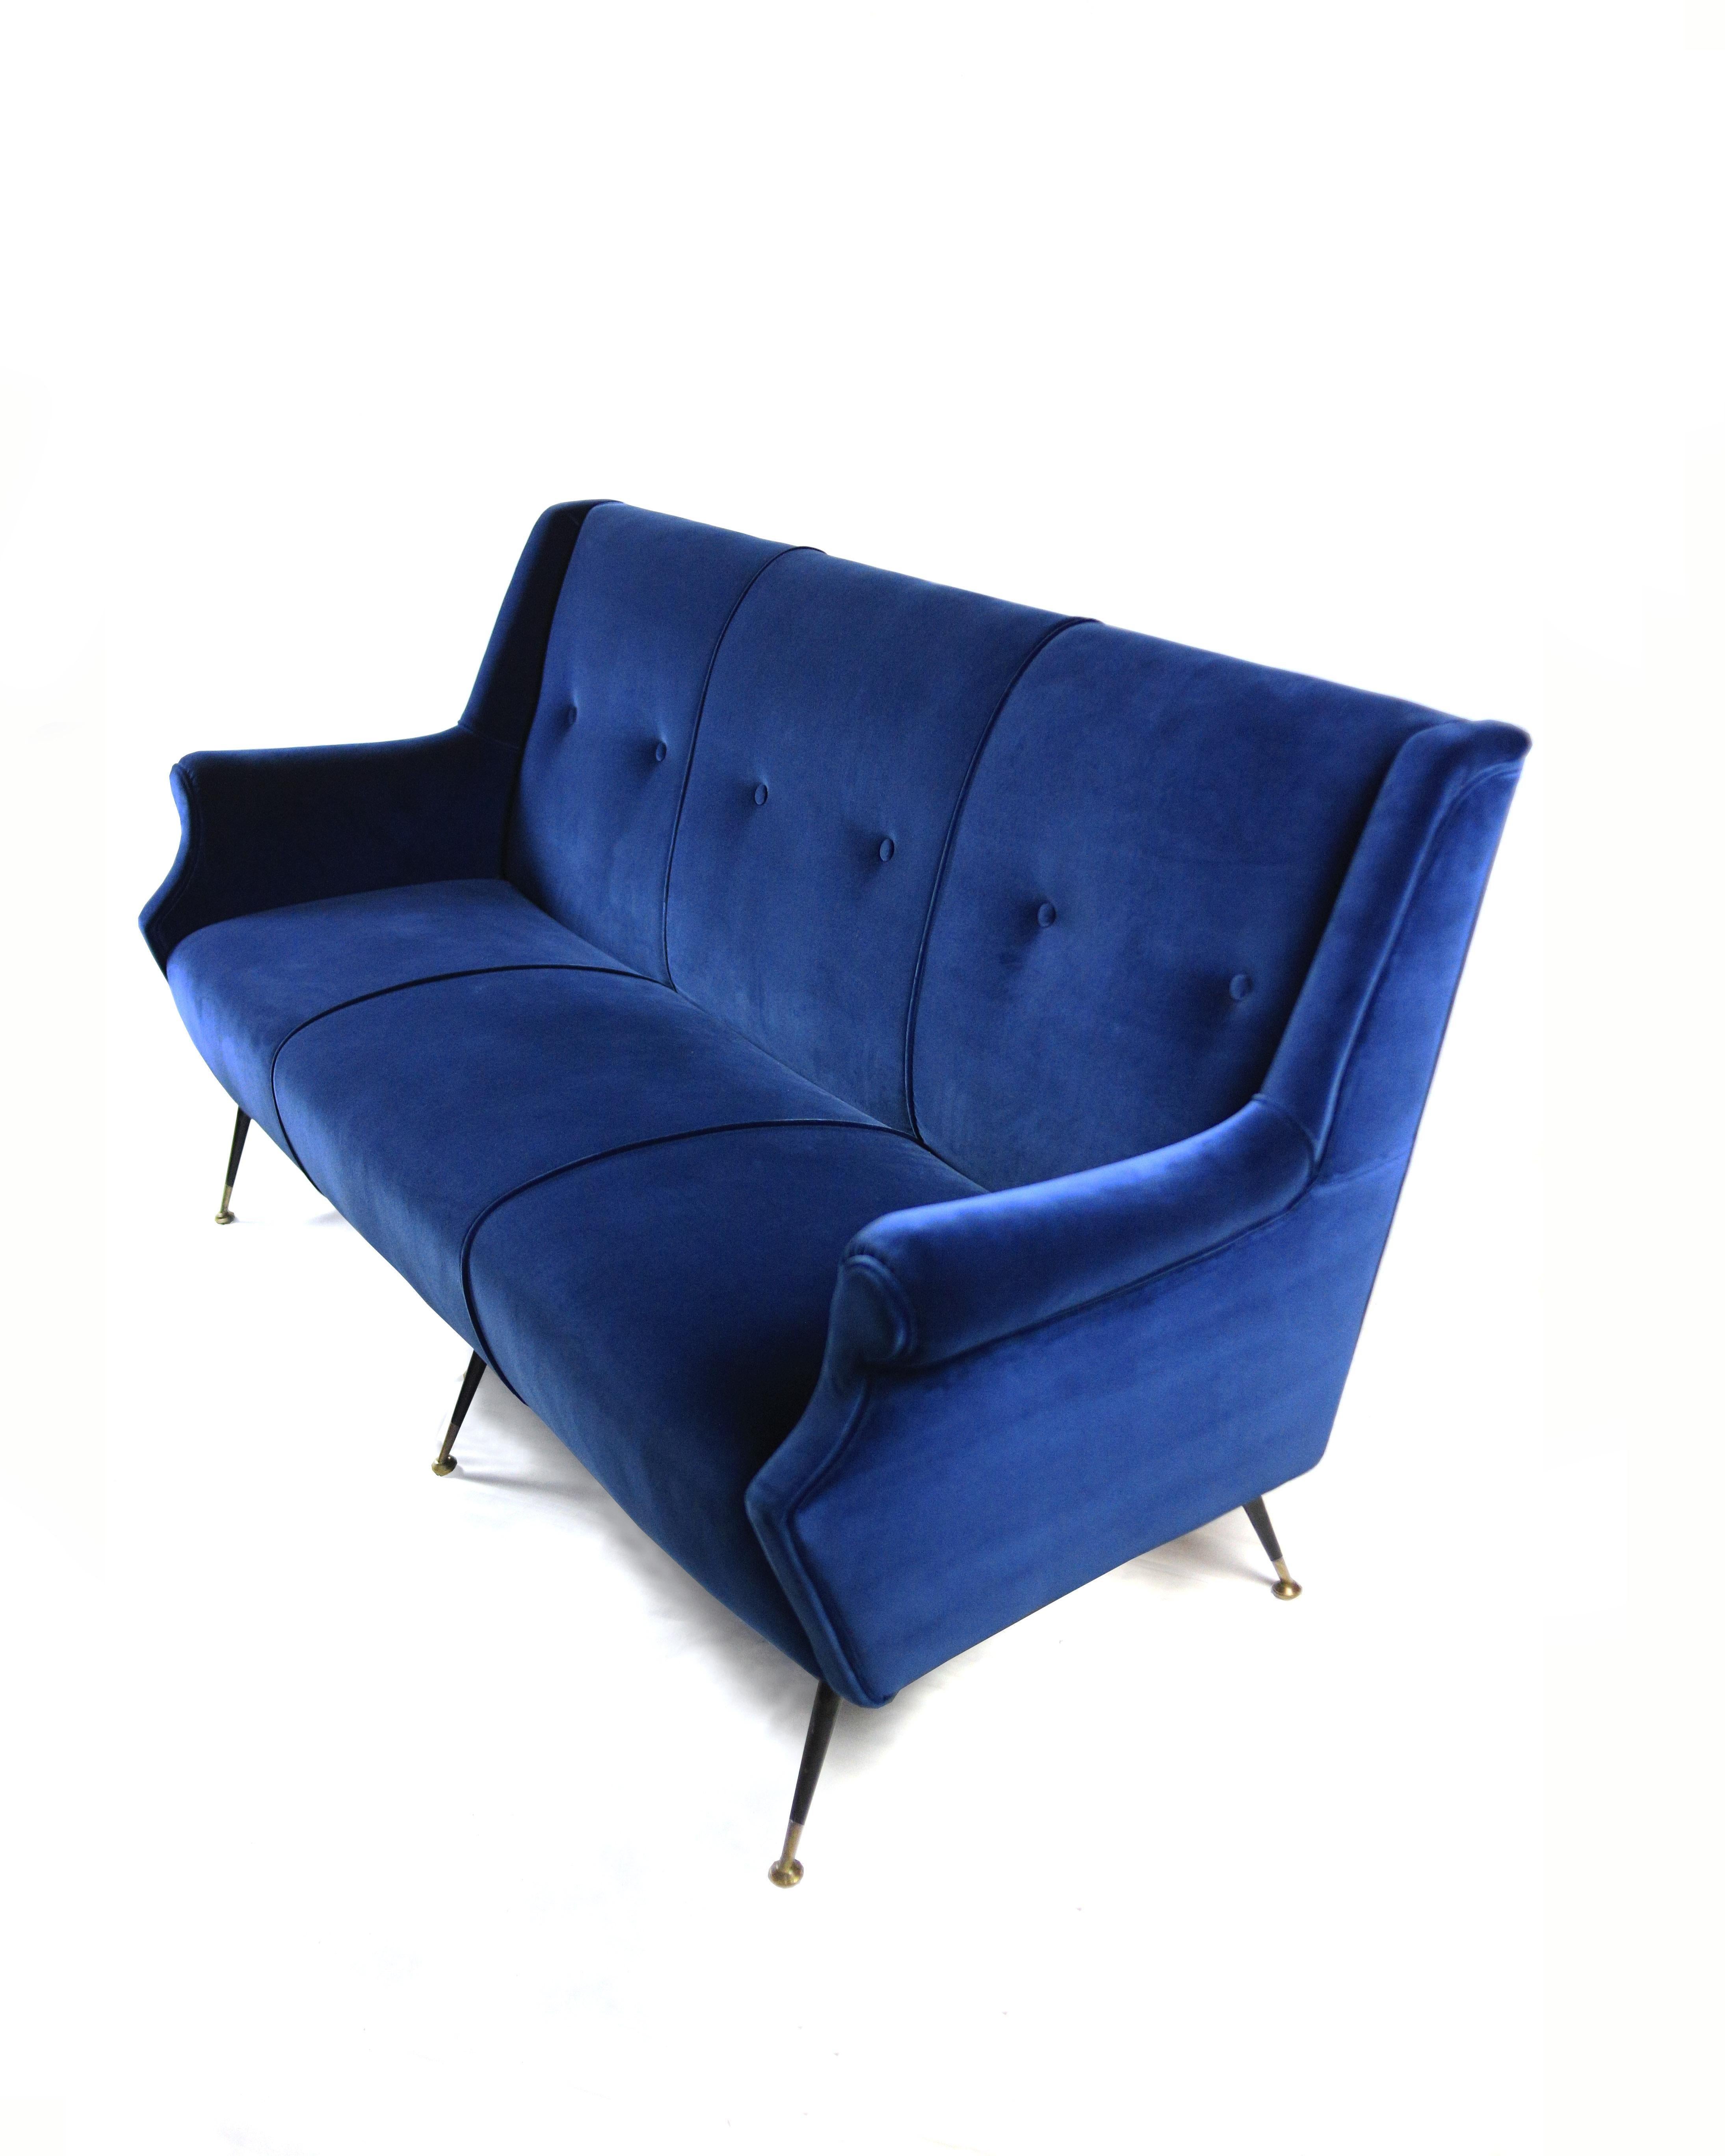 Hand-Crafted Mid-Century Modern Blue Velvet and Brass Sofa, Italian Design, 1950s For Sale